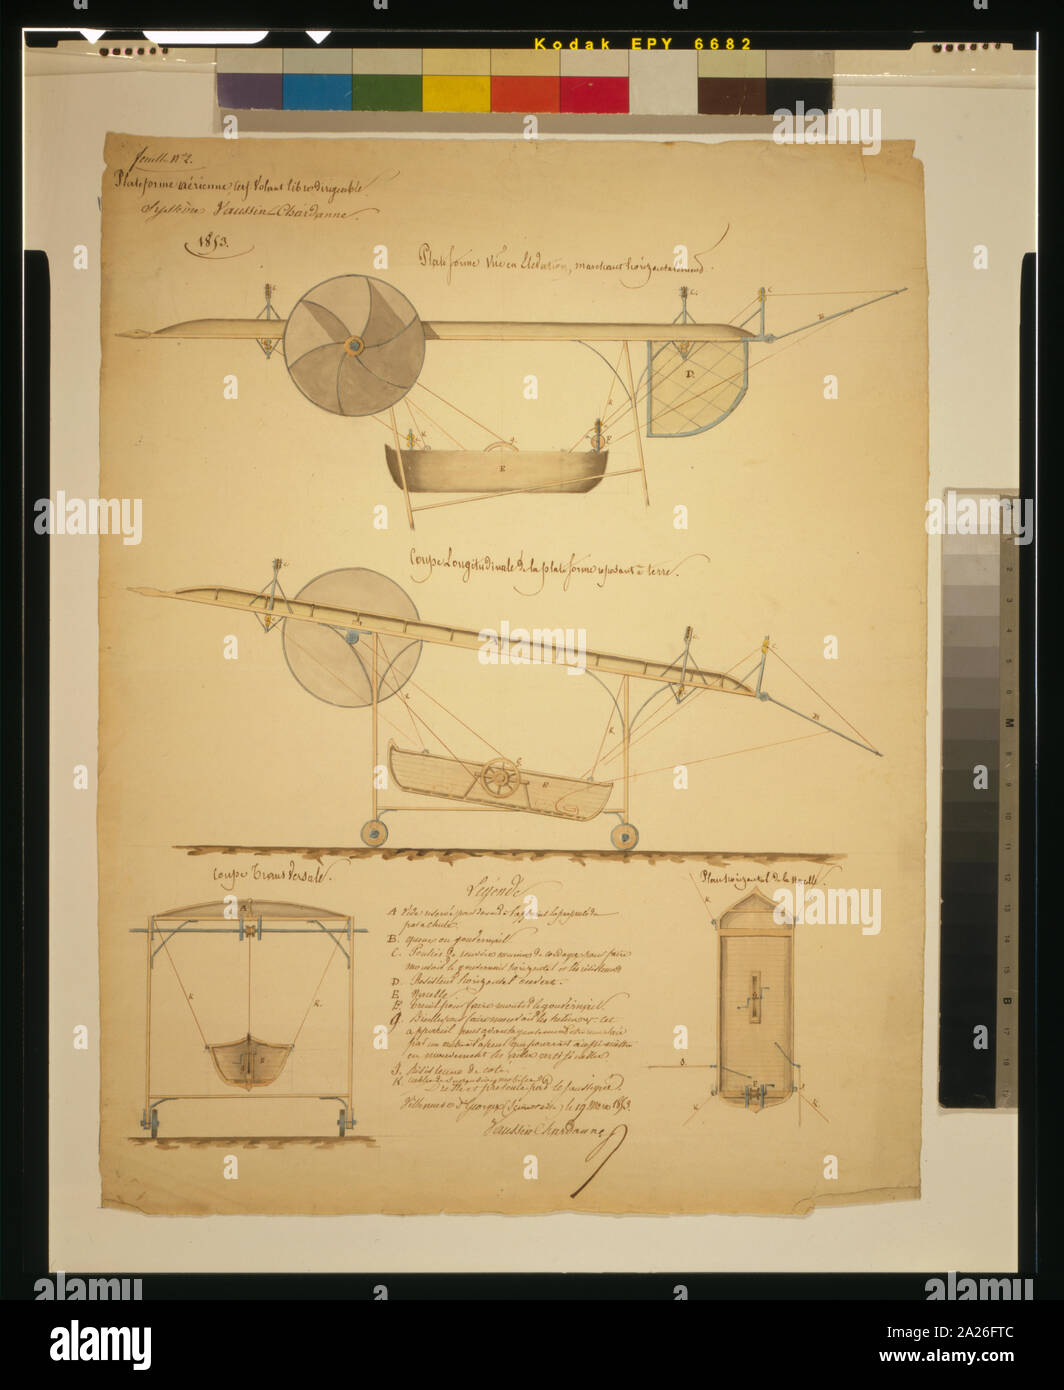 Plateforme aérienne, cerf-volant libre dirigeable, système Vaussin-Chardanne; Design drawing shows a system for powering an airship with manually operated propellers. Includes longitudinal views of dirigible platform assembly and identification key.; Stock Photo